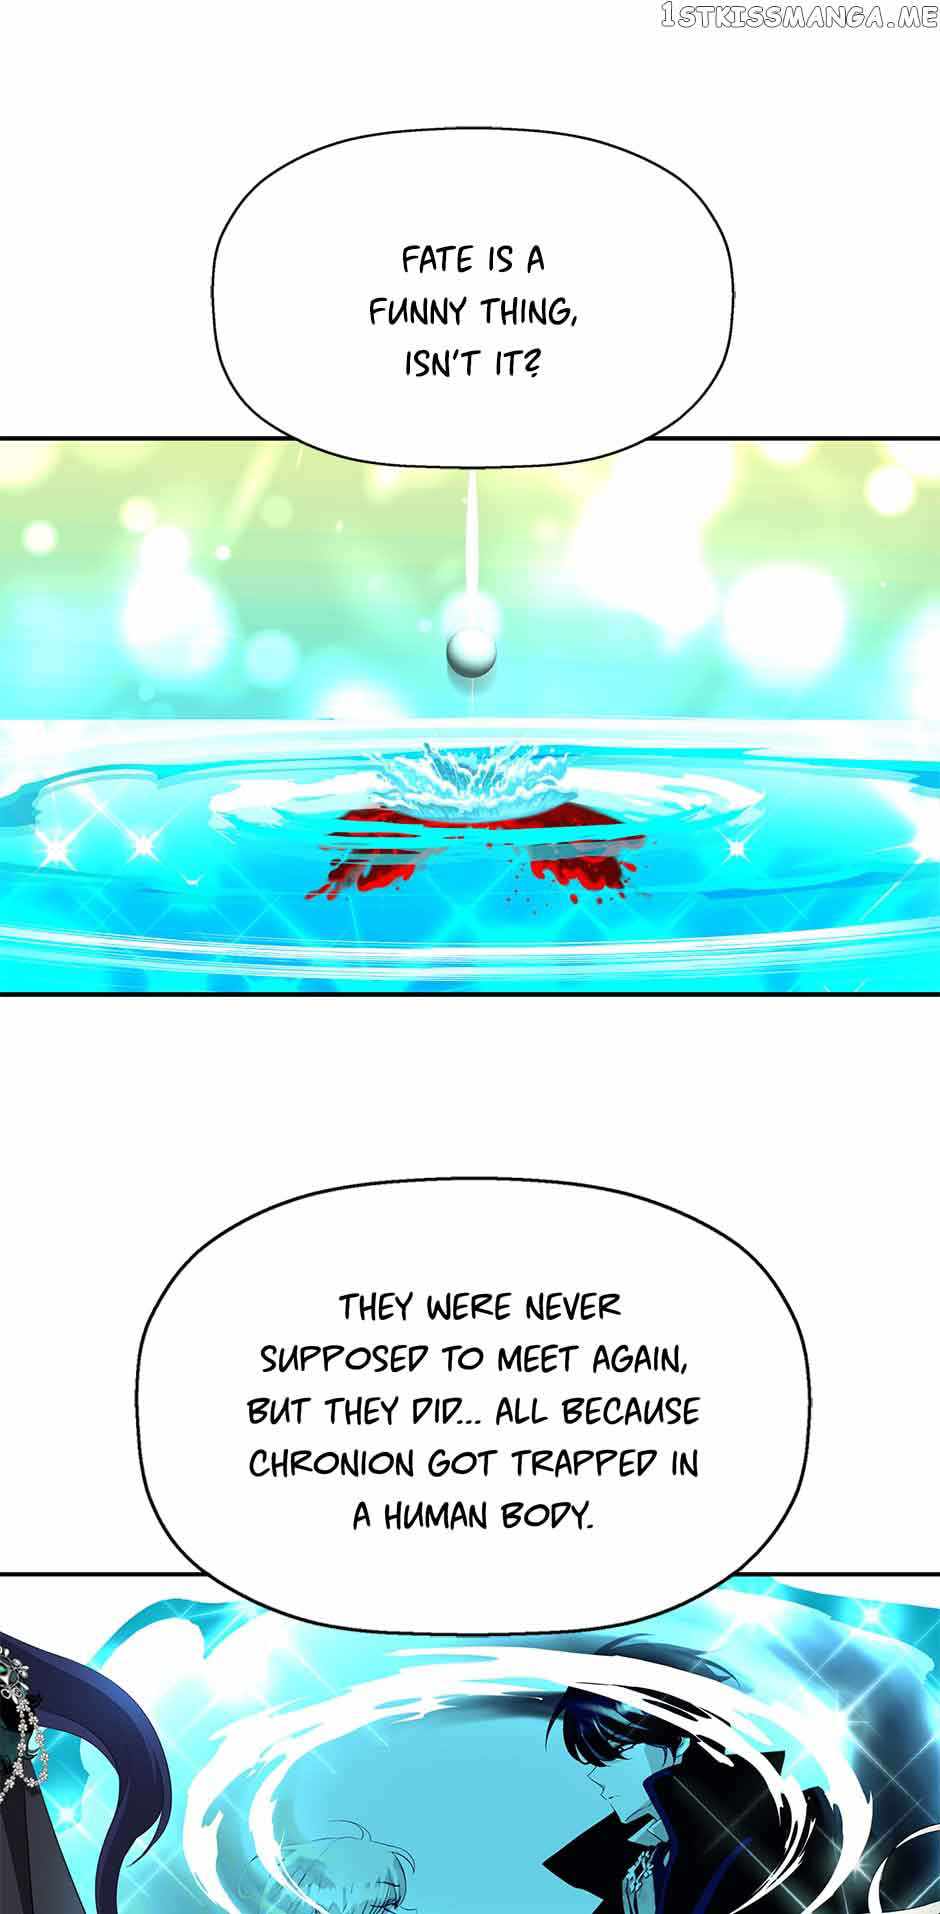 I’m a Killer but I’m Thinking of Living as a Princess Chapter 54-eng-li - Page 0